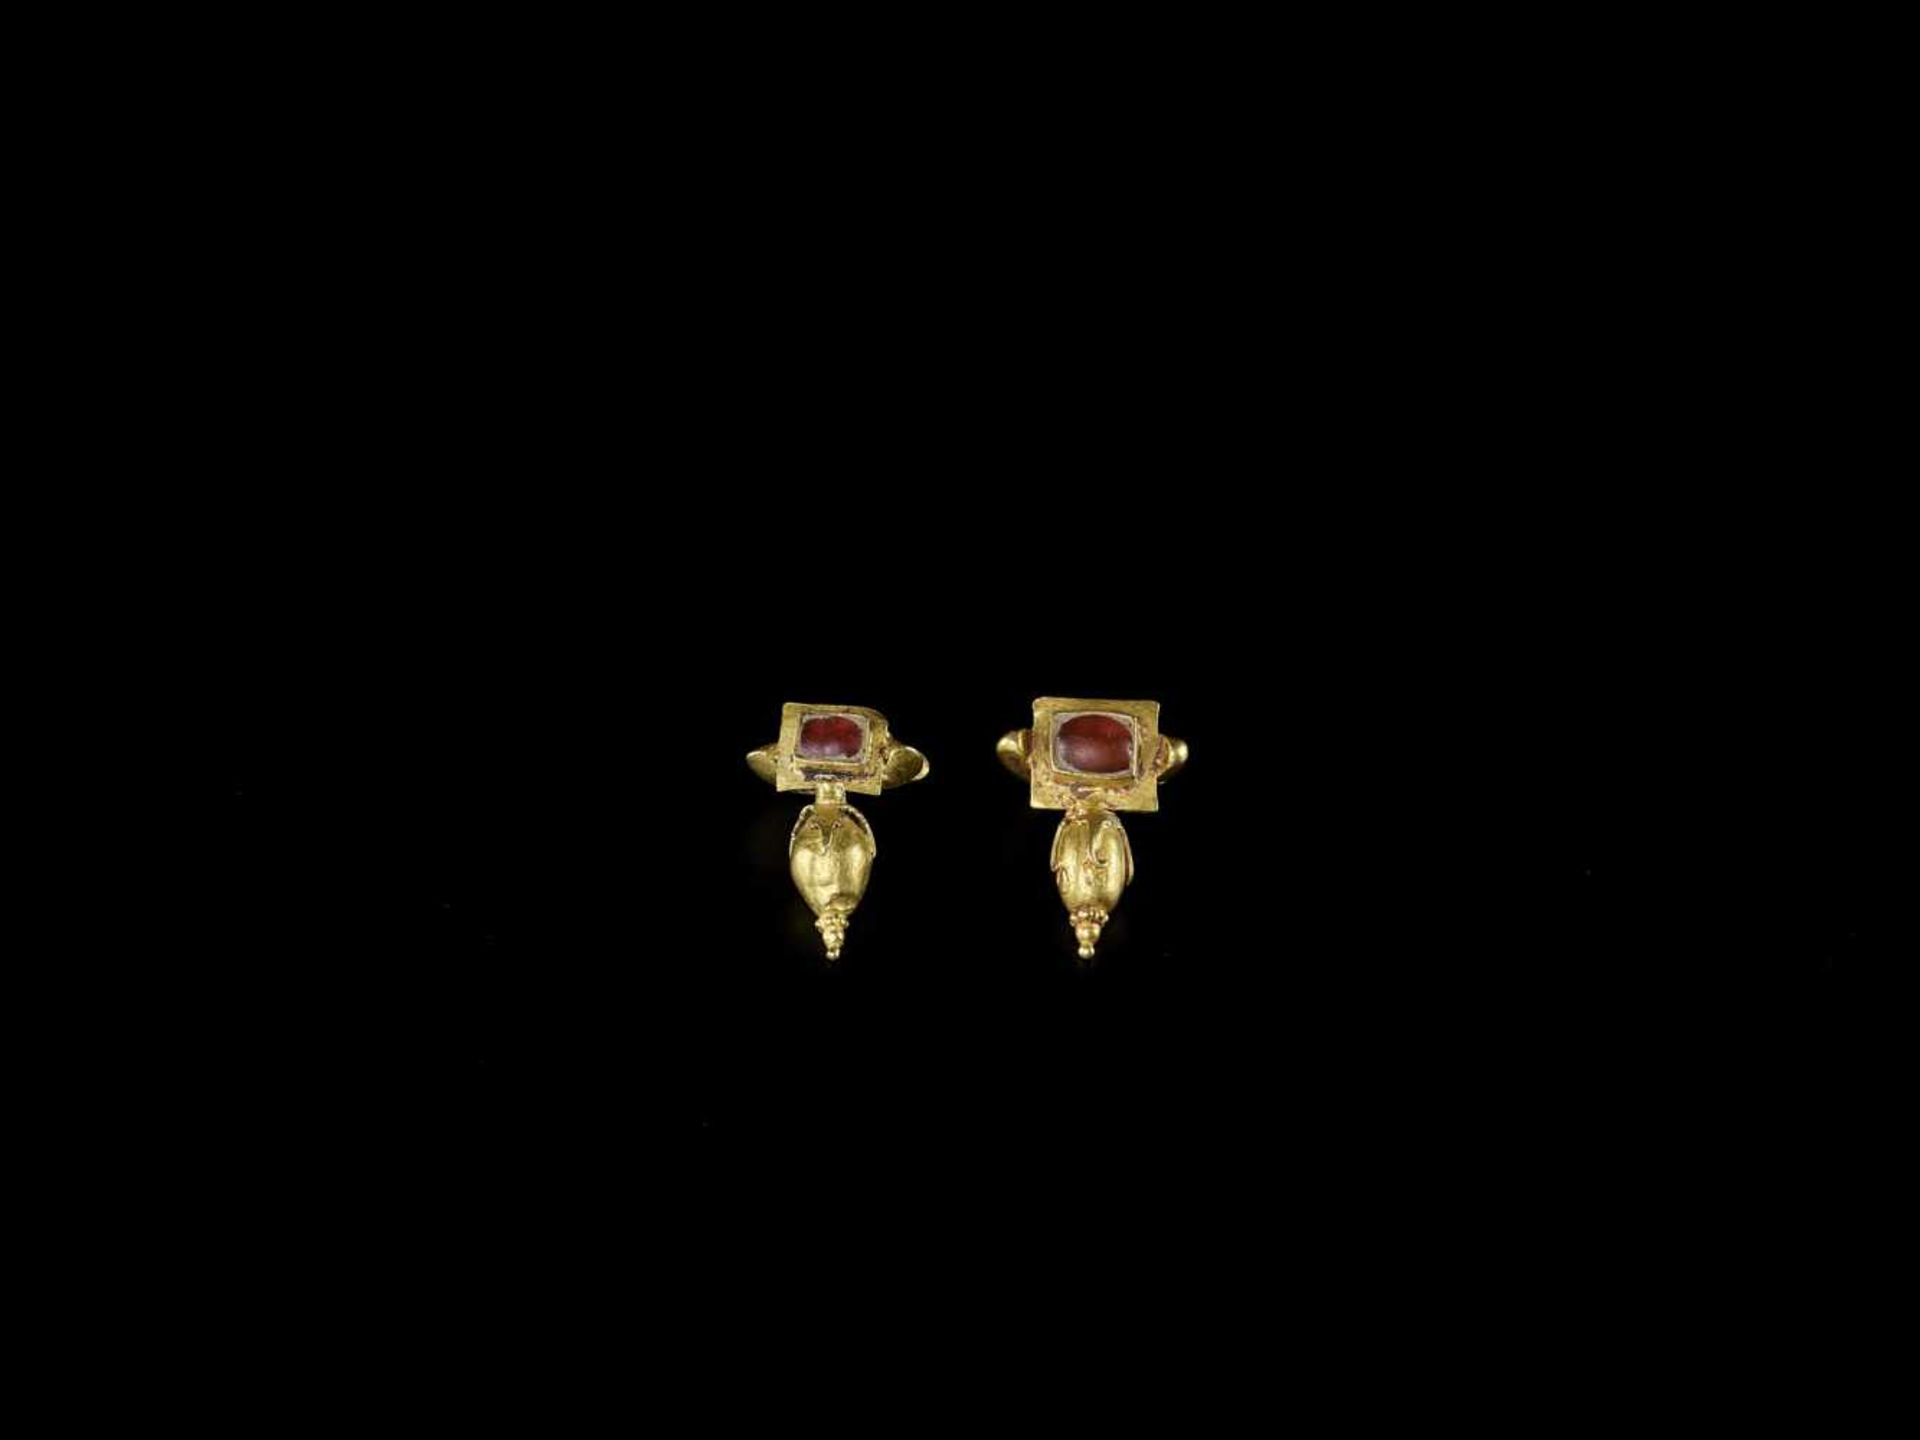 A PAIR OF CHAM GOLD EAR ORNAMENTS WITH RED GEMSTONES Champa, 12th – 14th century. Each earring is